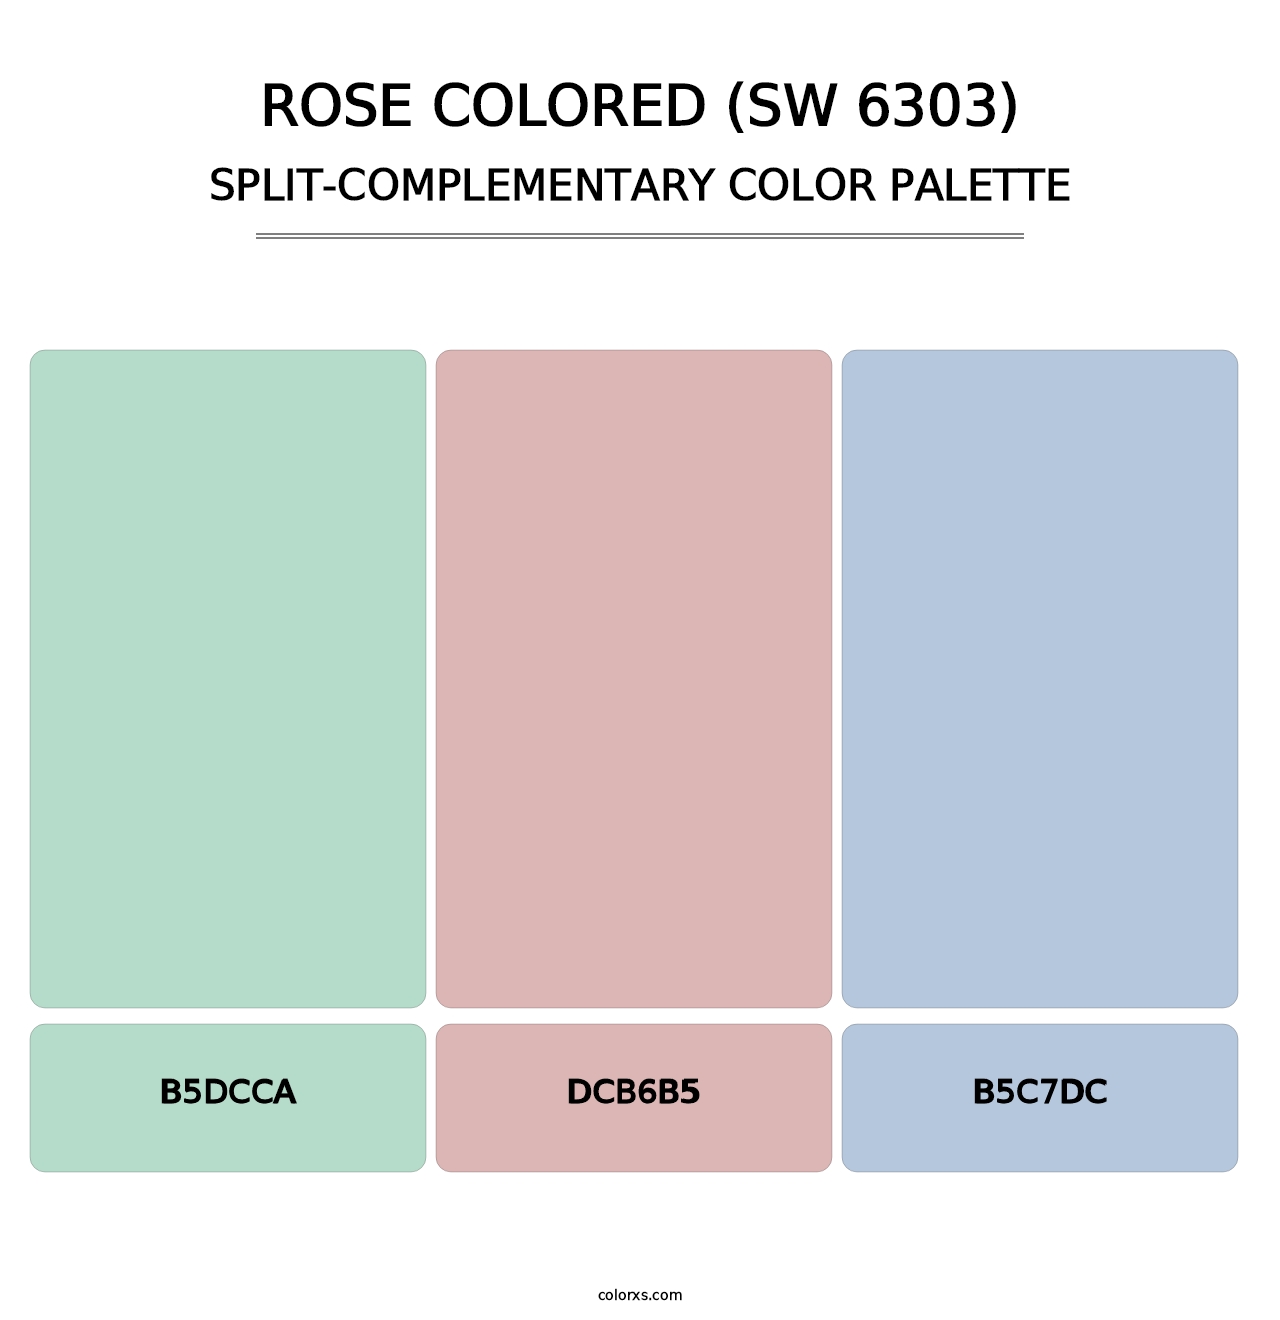 Rose Colored (SW 6303) - Split-Complementary Color Palette